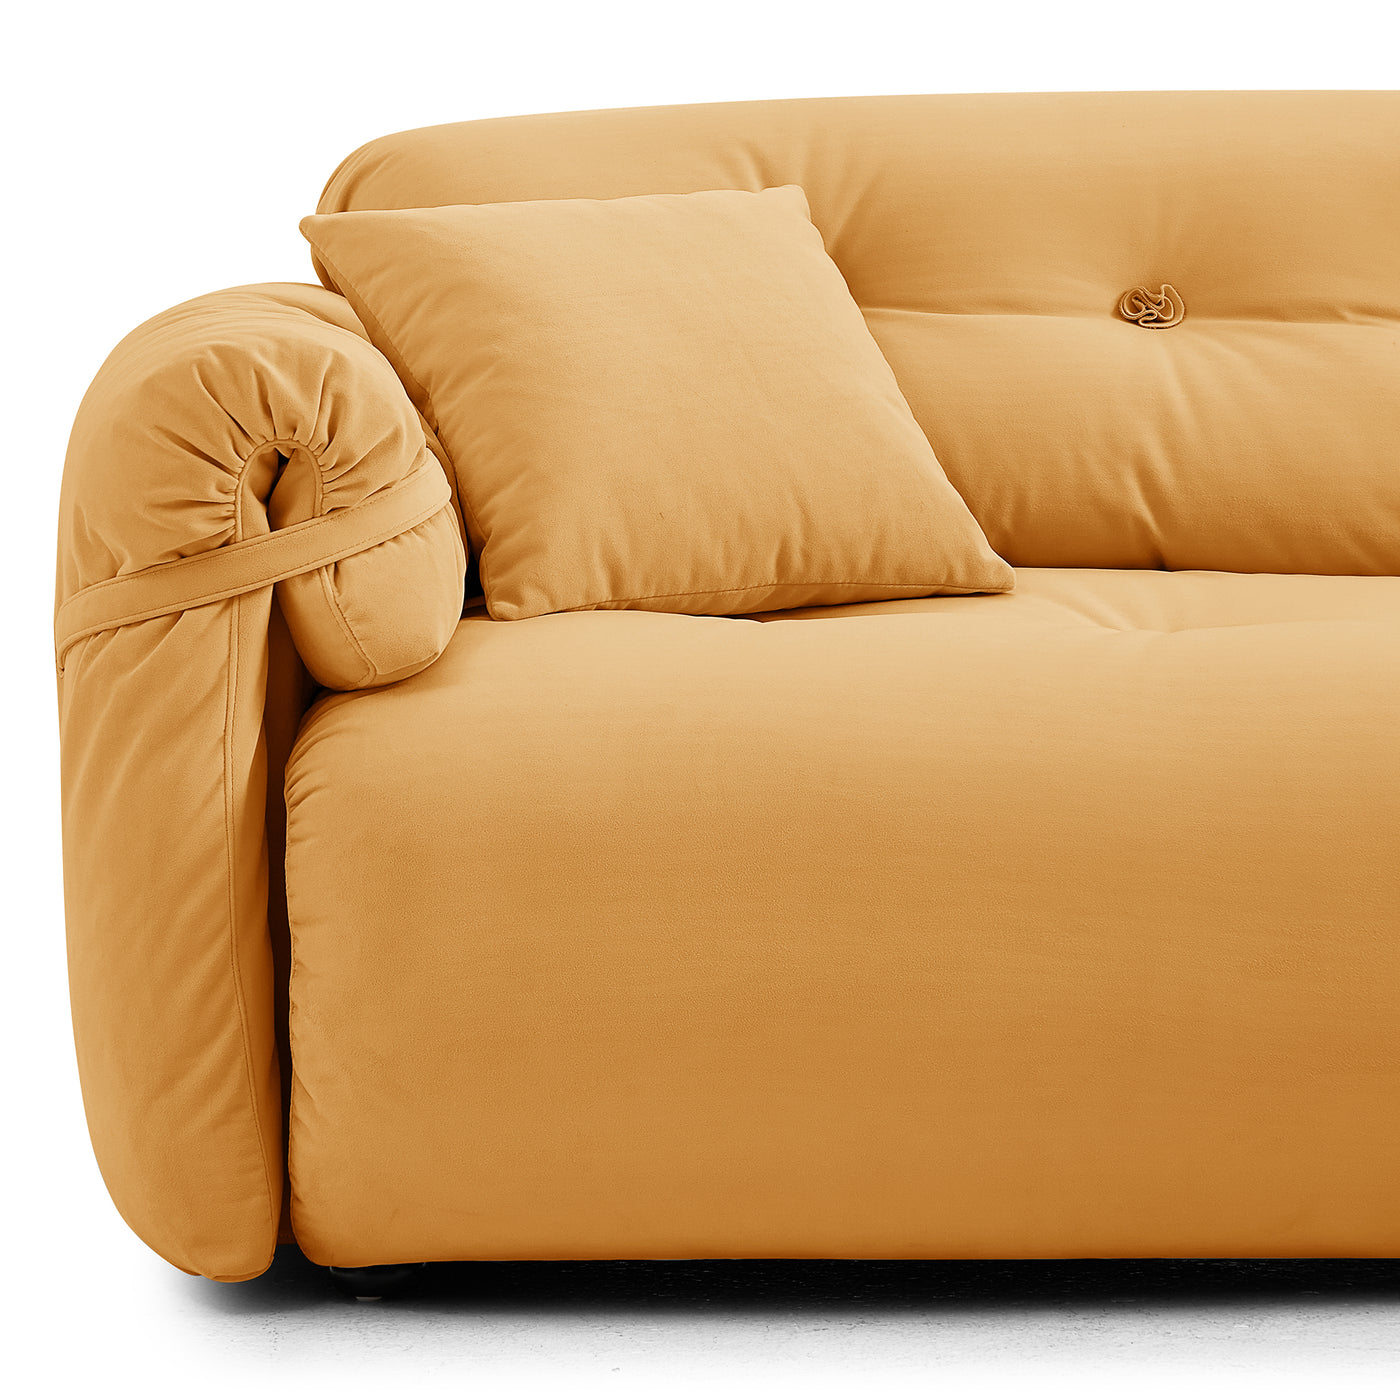 The Butter Sofa-Yellow